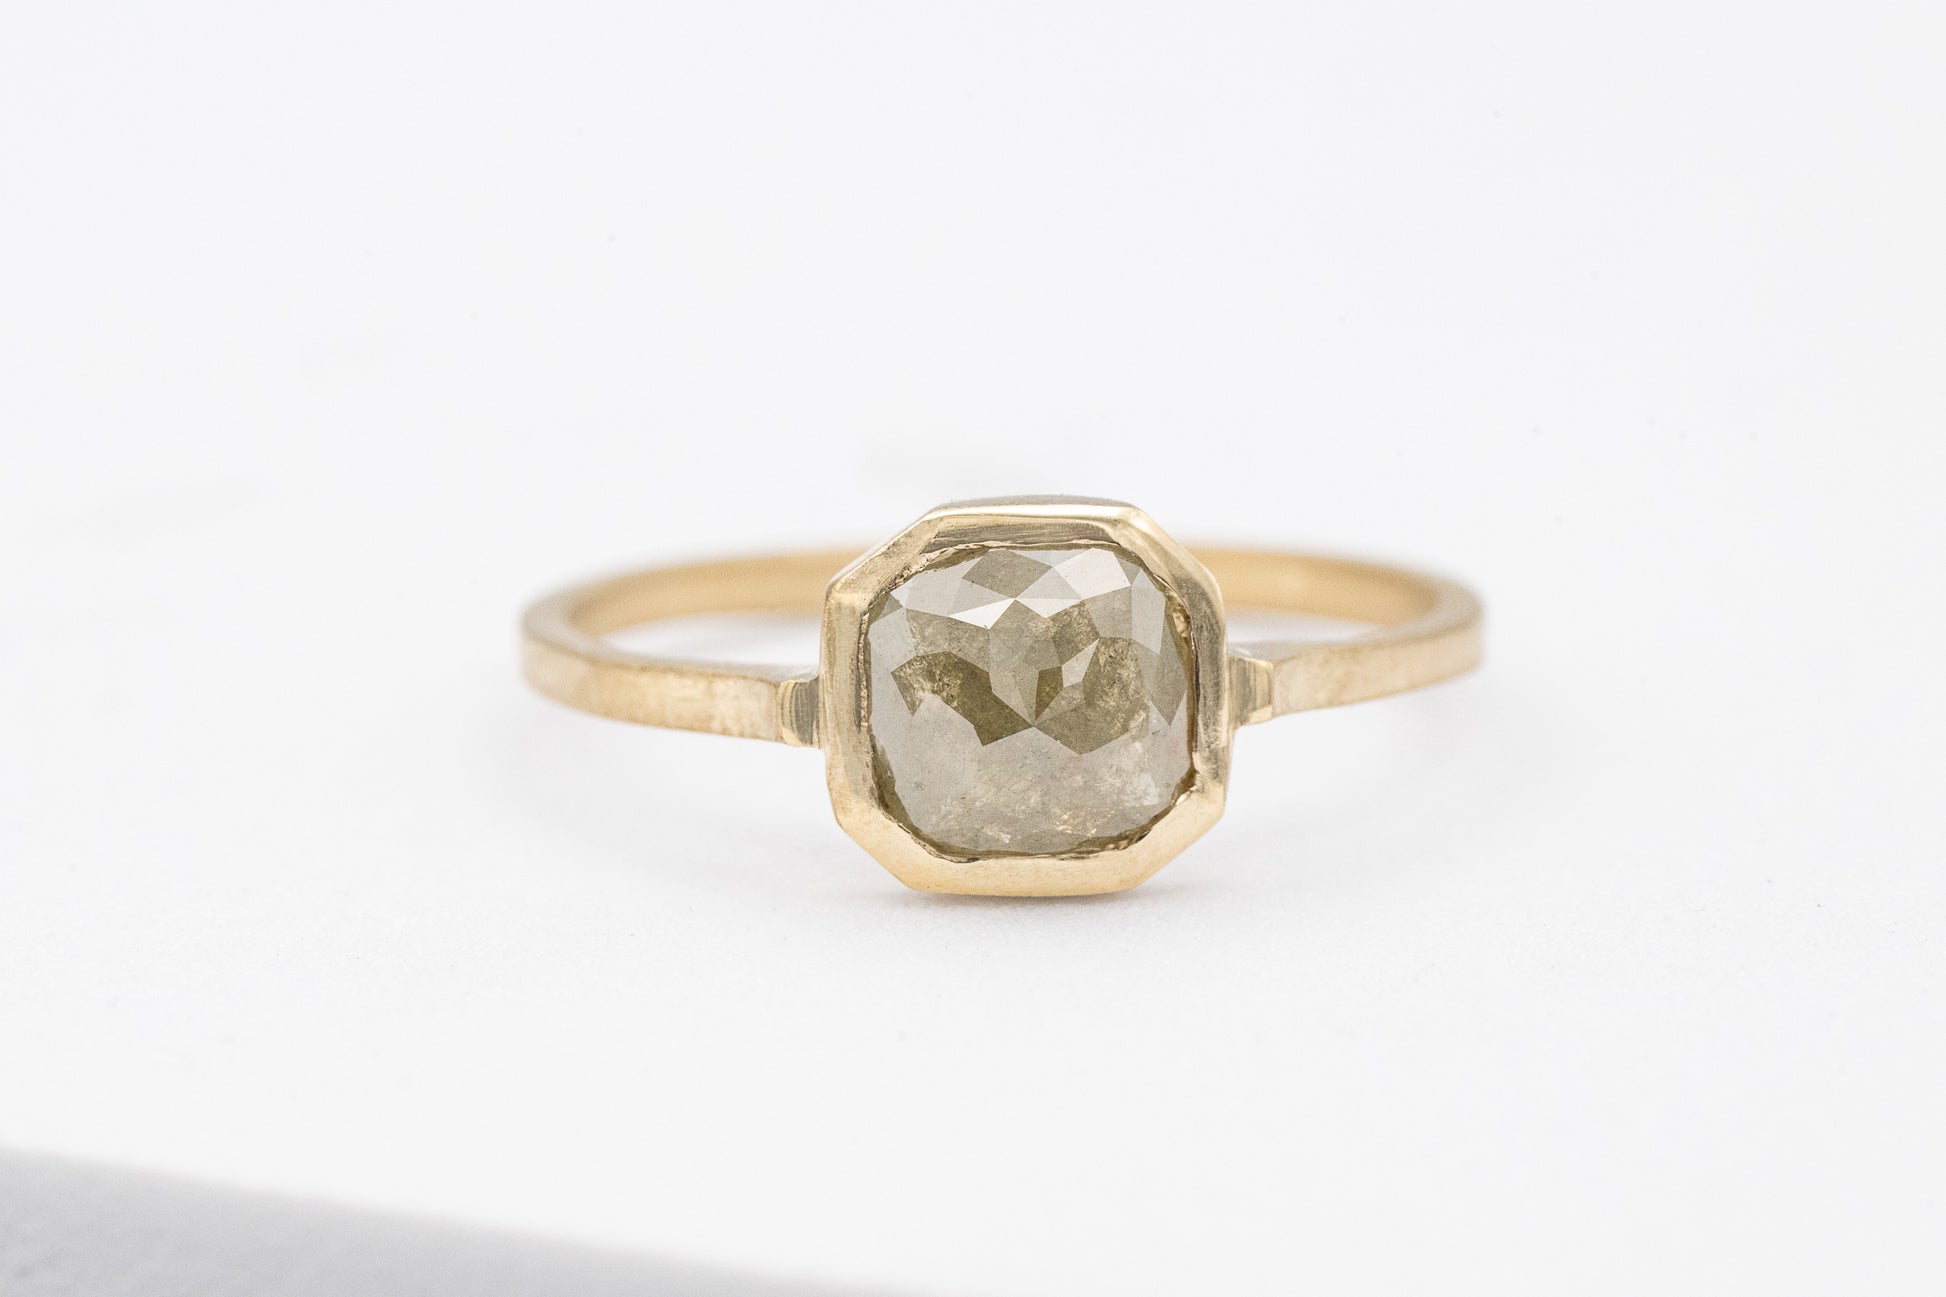 A handmade Gray Diamond Ring in 14k Yellow Gold with an oval shaped diamond.